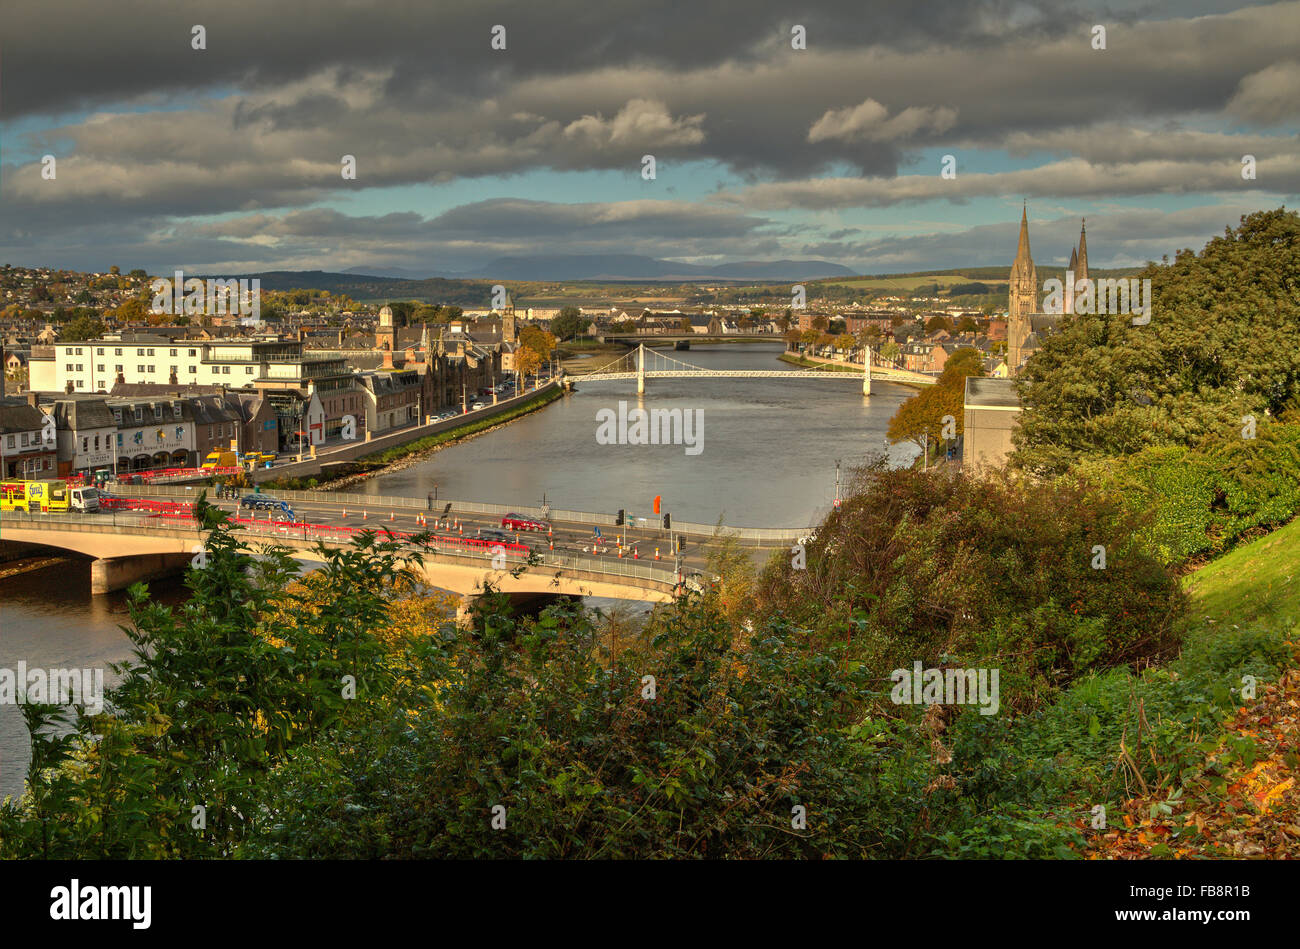 Inverness - Capital of the Highlands. Stock Photo